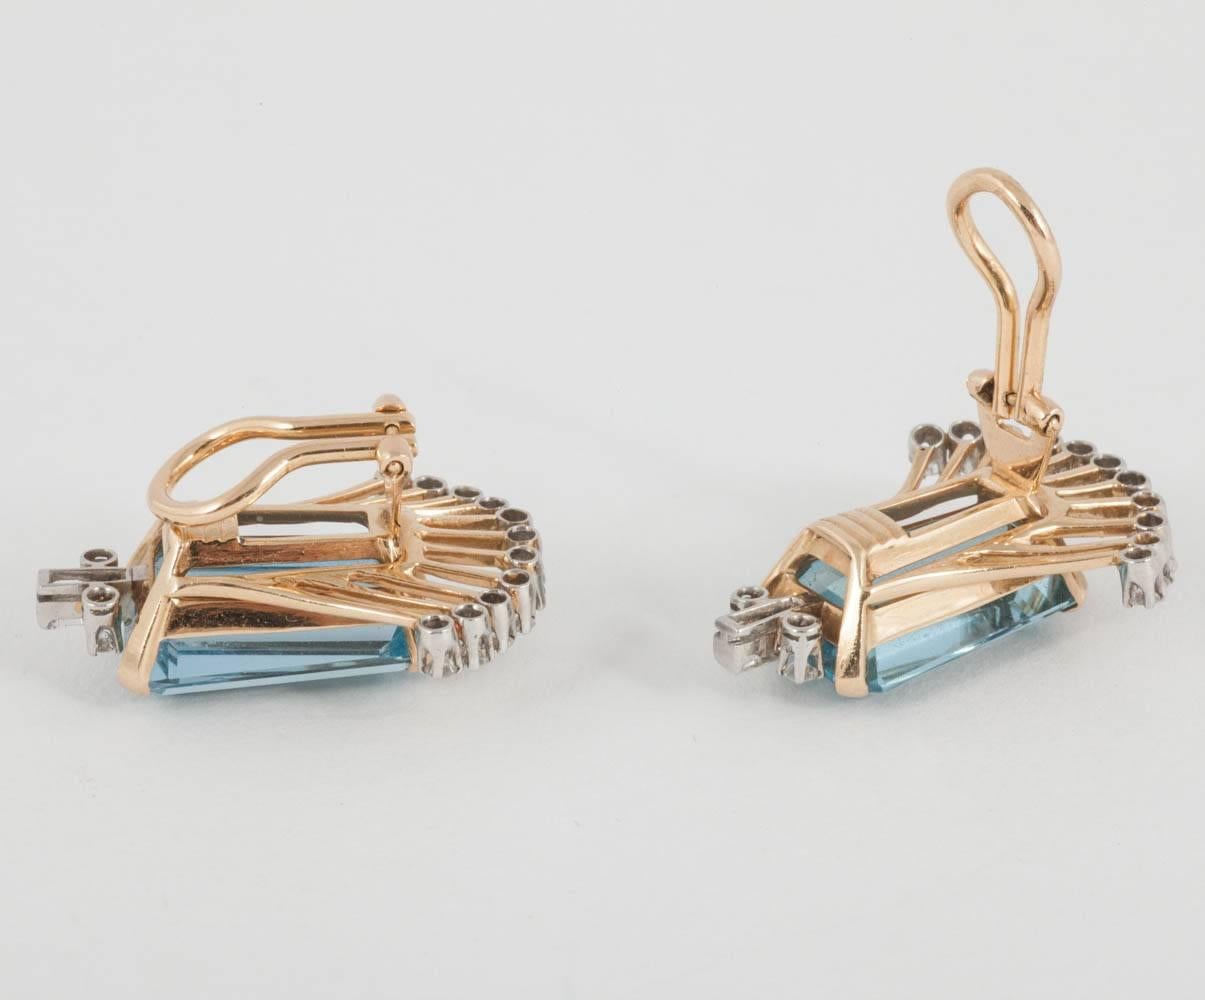 These stylish earrings are from 1960's and have kite shaped aquamarines enhanced by Diamonds/ Set in 18ct Gold
1.2cts of Daimonds